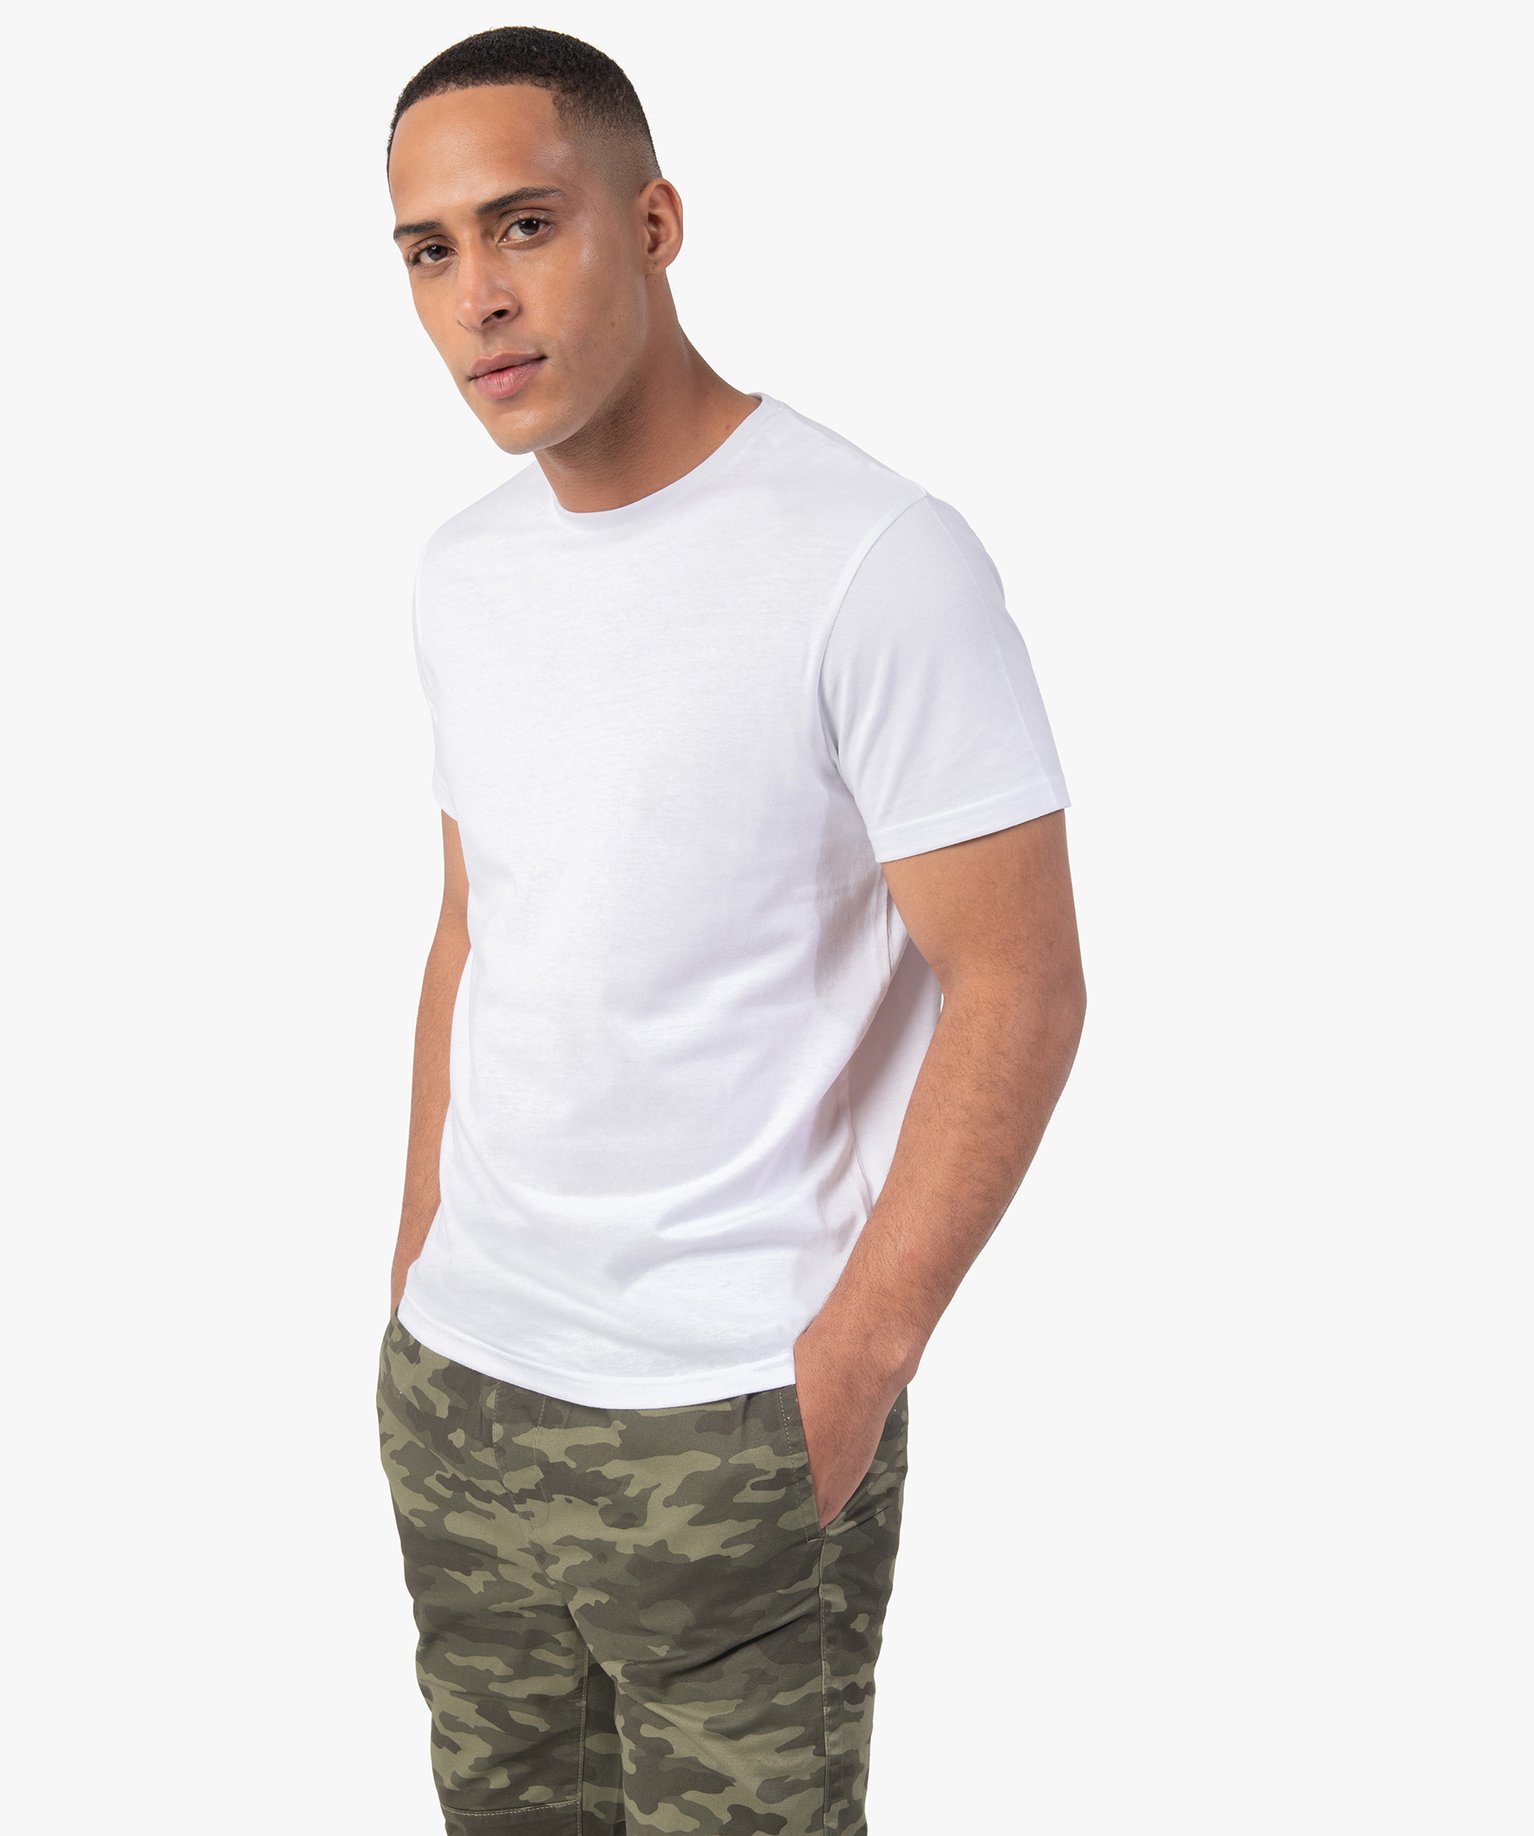 tee-shirt homme a manches courtes et col rond blanc tee-shirts